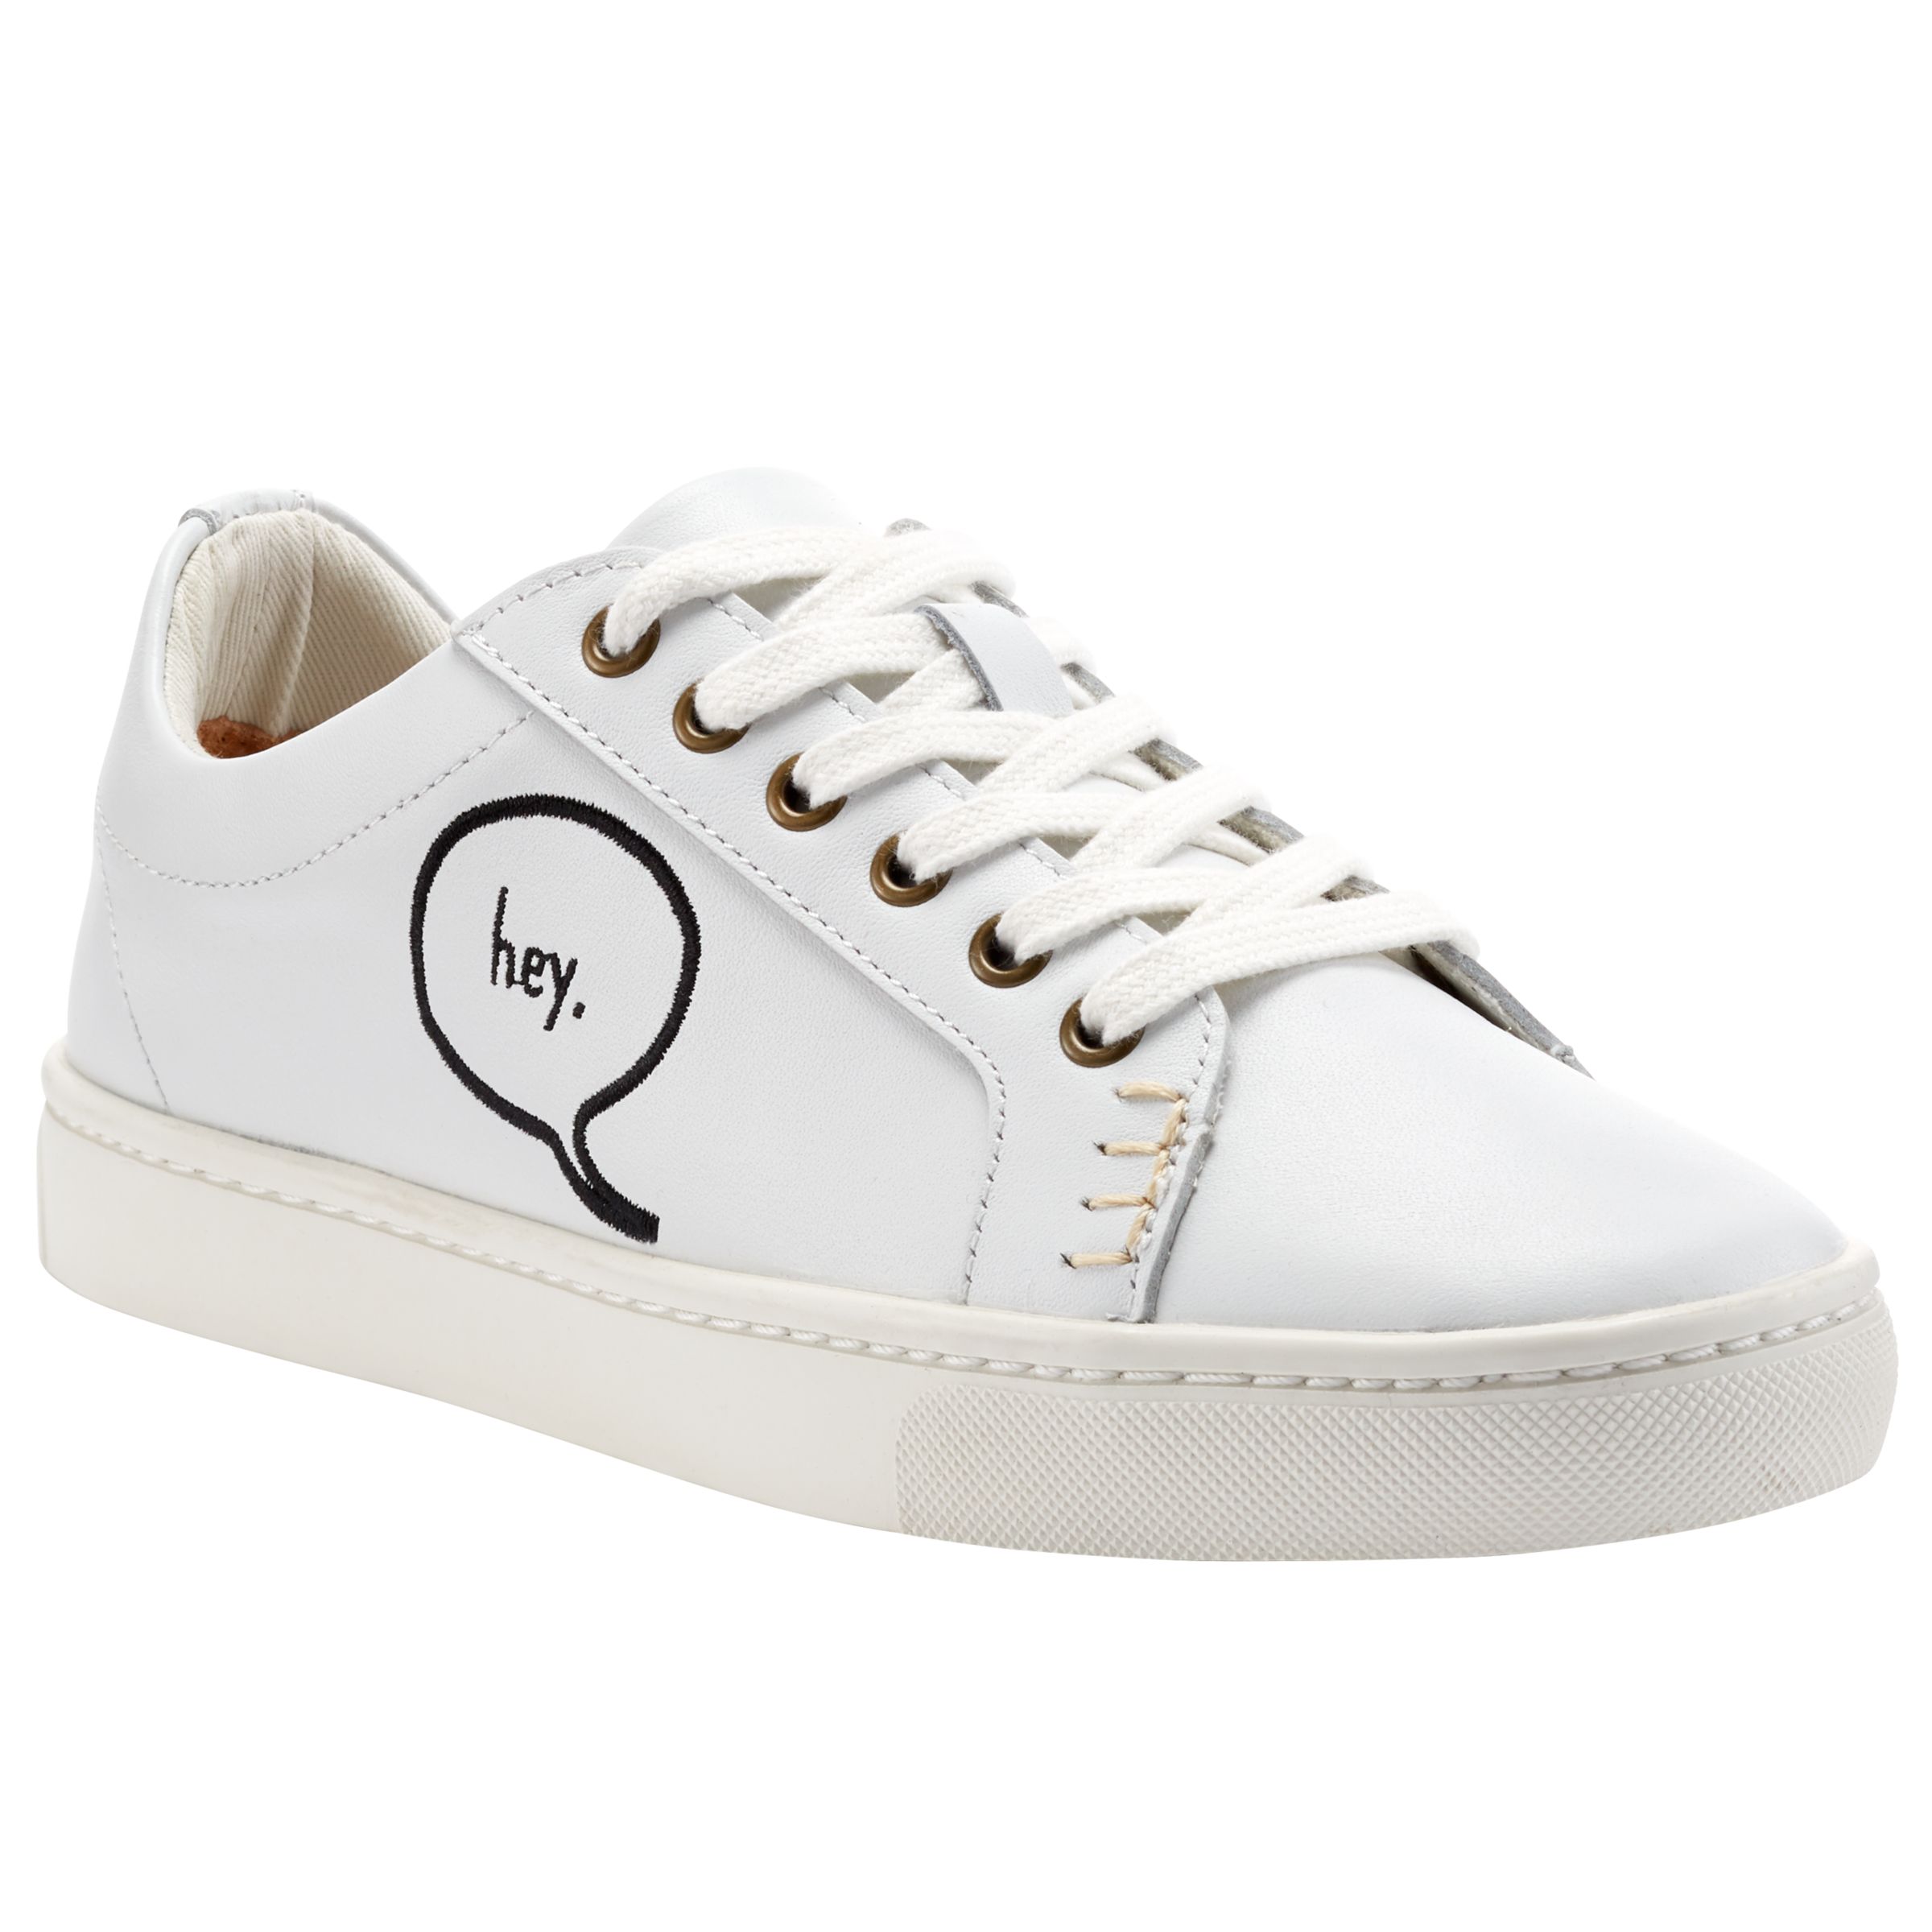 Soludos Embroidered Lace-Up Trainers, White, 6